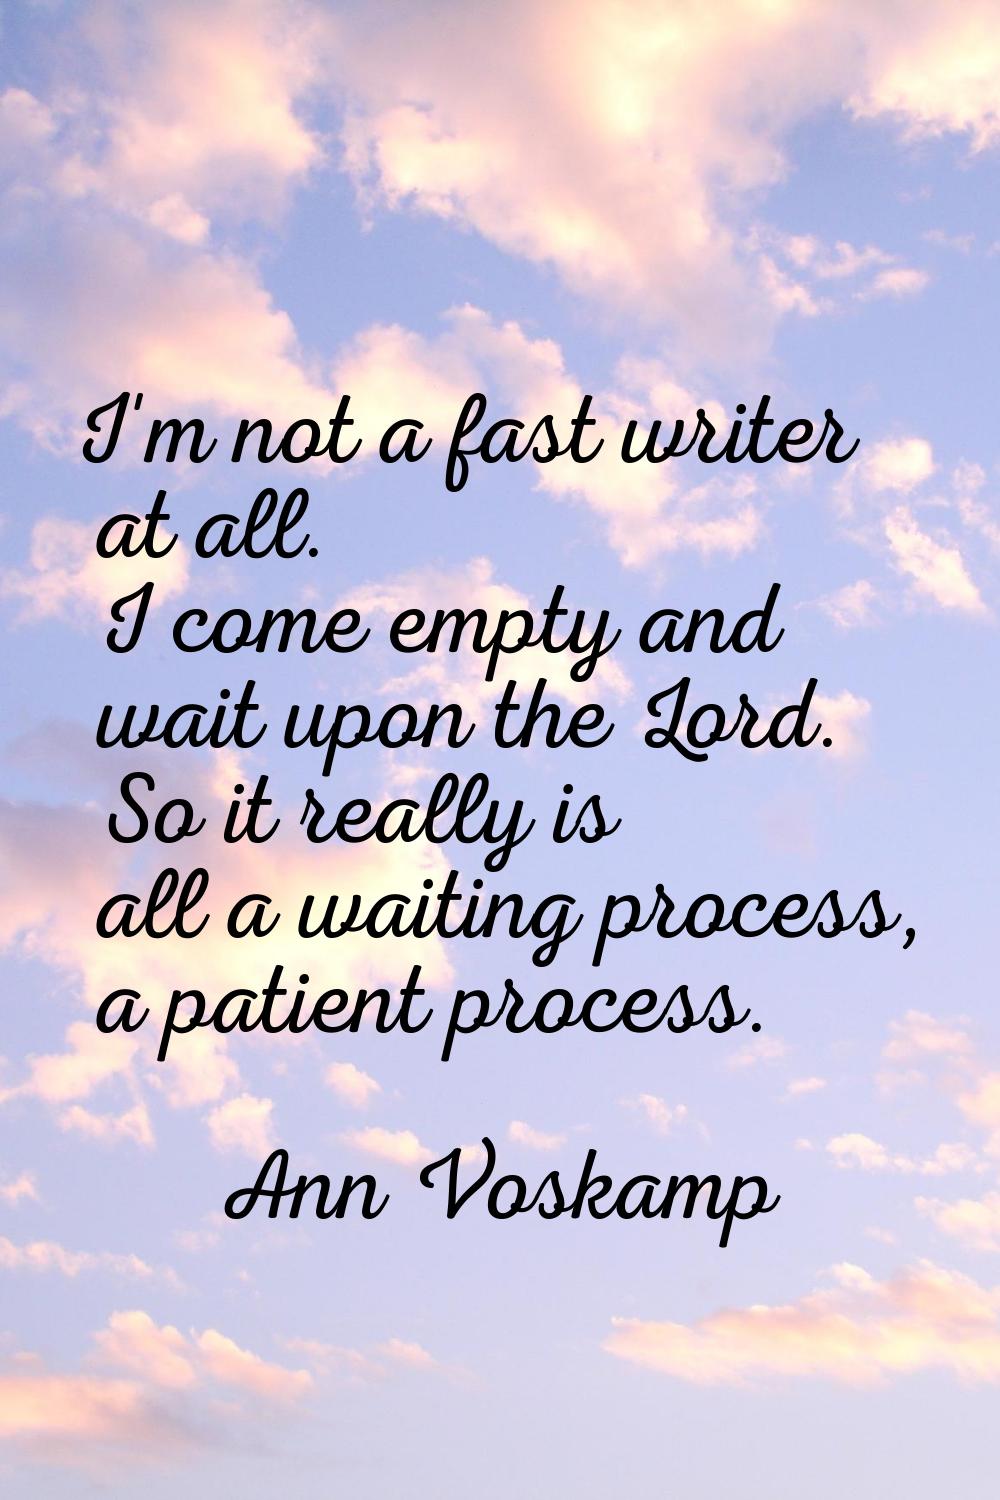 I'm not a fast writer at all. I come empty and wait upon the Lord. So it really is all a waiting pr